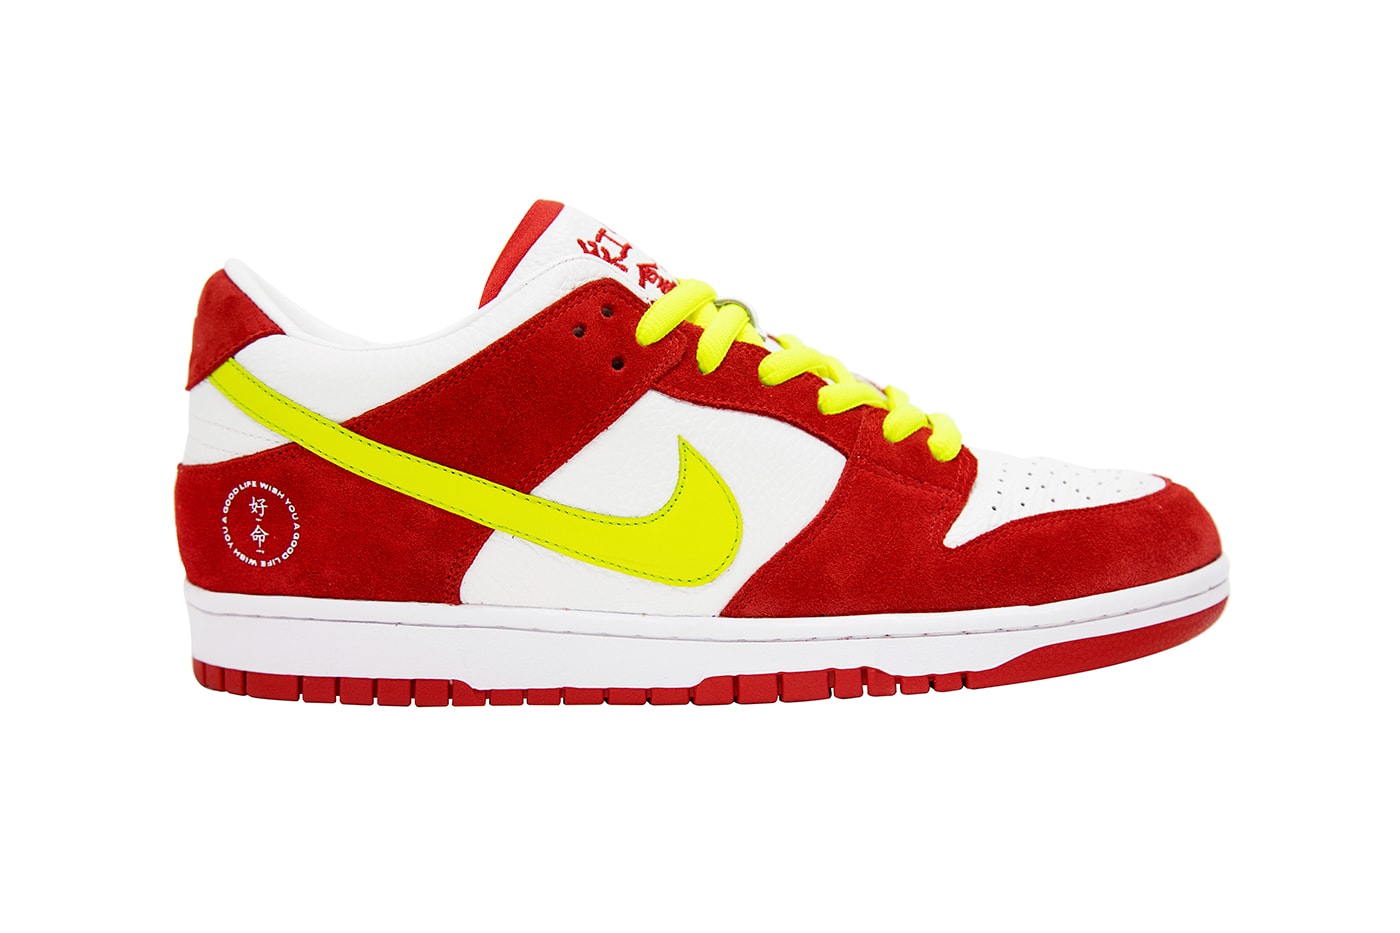 Nick The Real Wish You A Good Life x The Remade Nike SB Dunk Low 